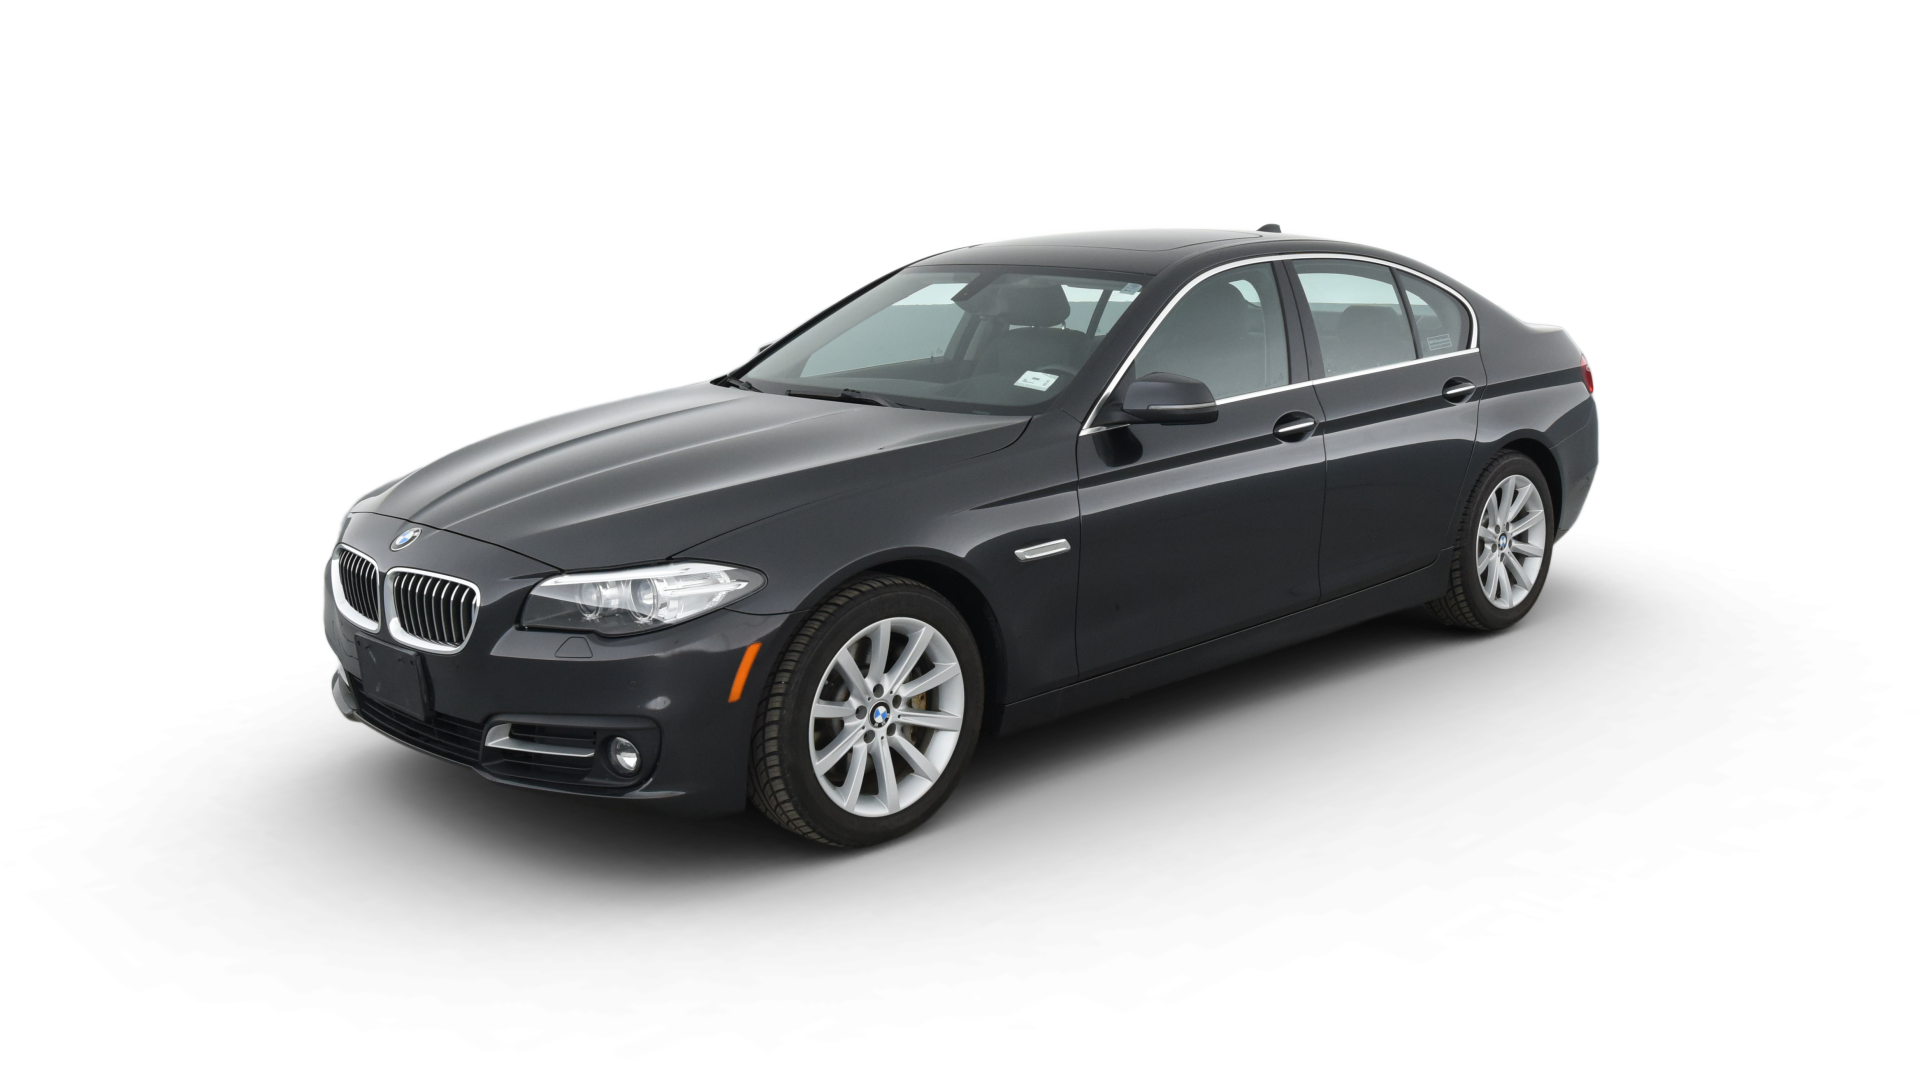 Used BMW 5 Series 535i xDrive For Sale Online | Carvana